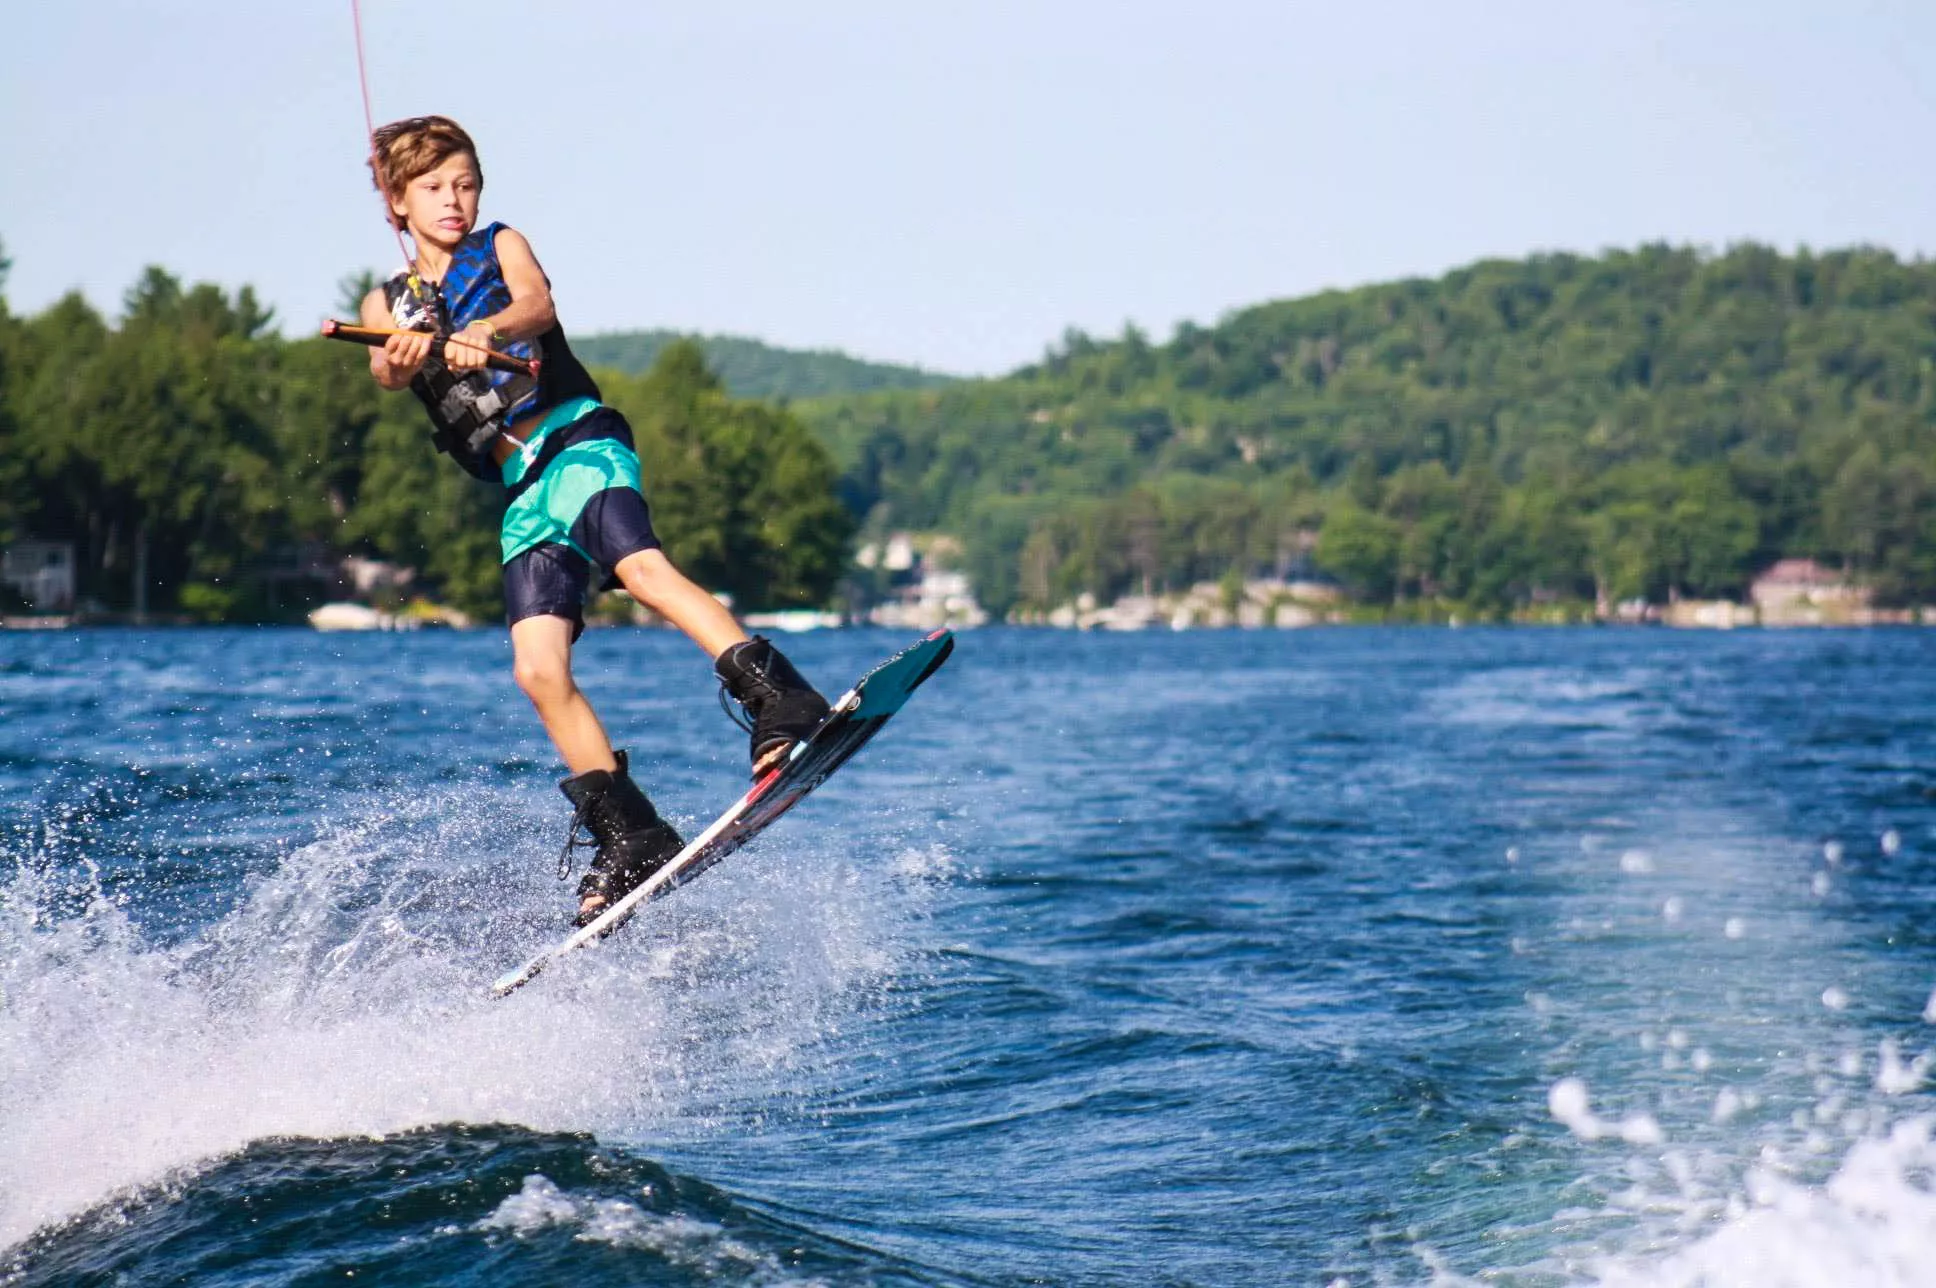 AF Wake in USA, North America | Wakeboarding - Rated 1.3